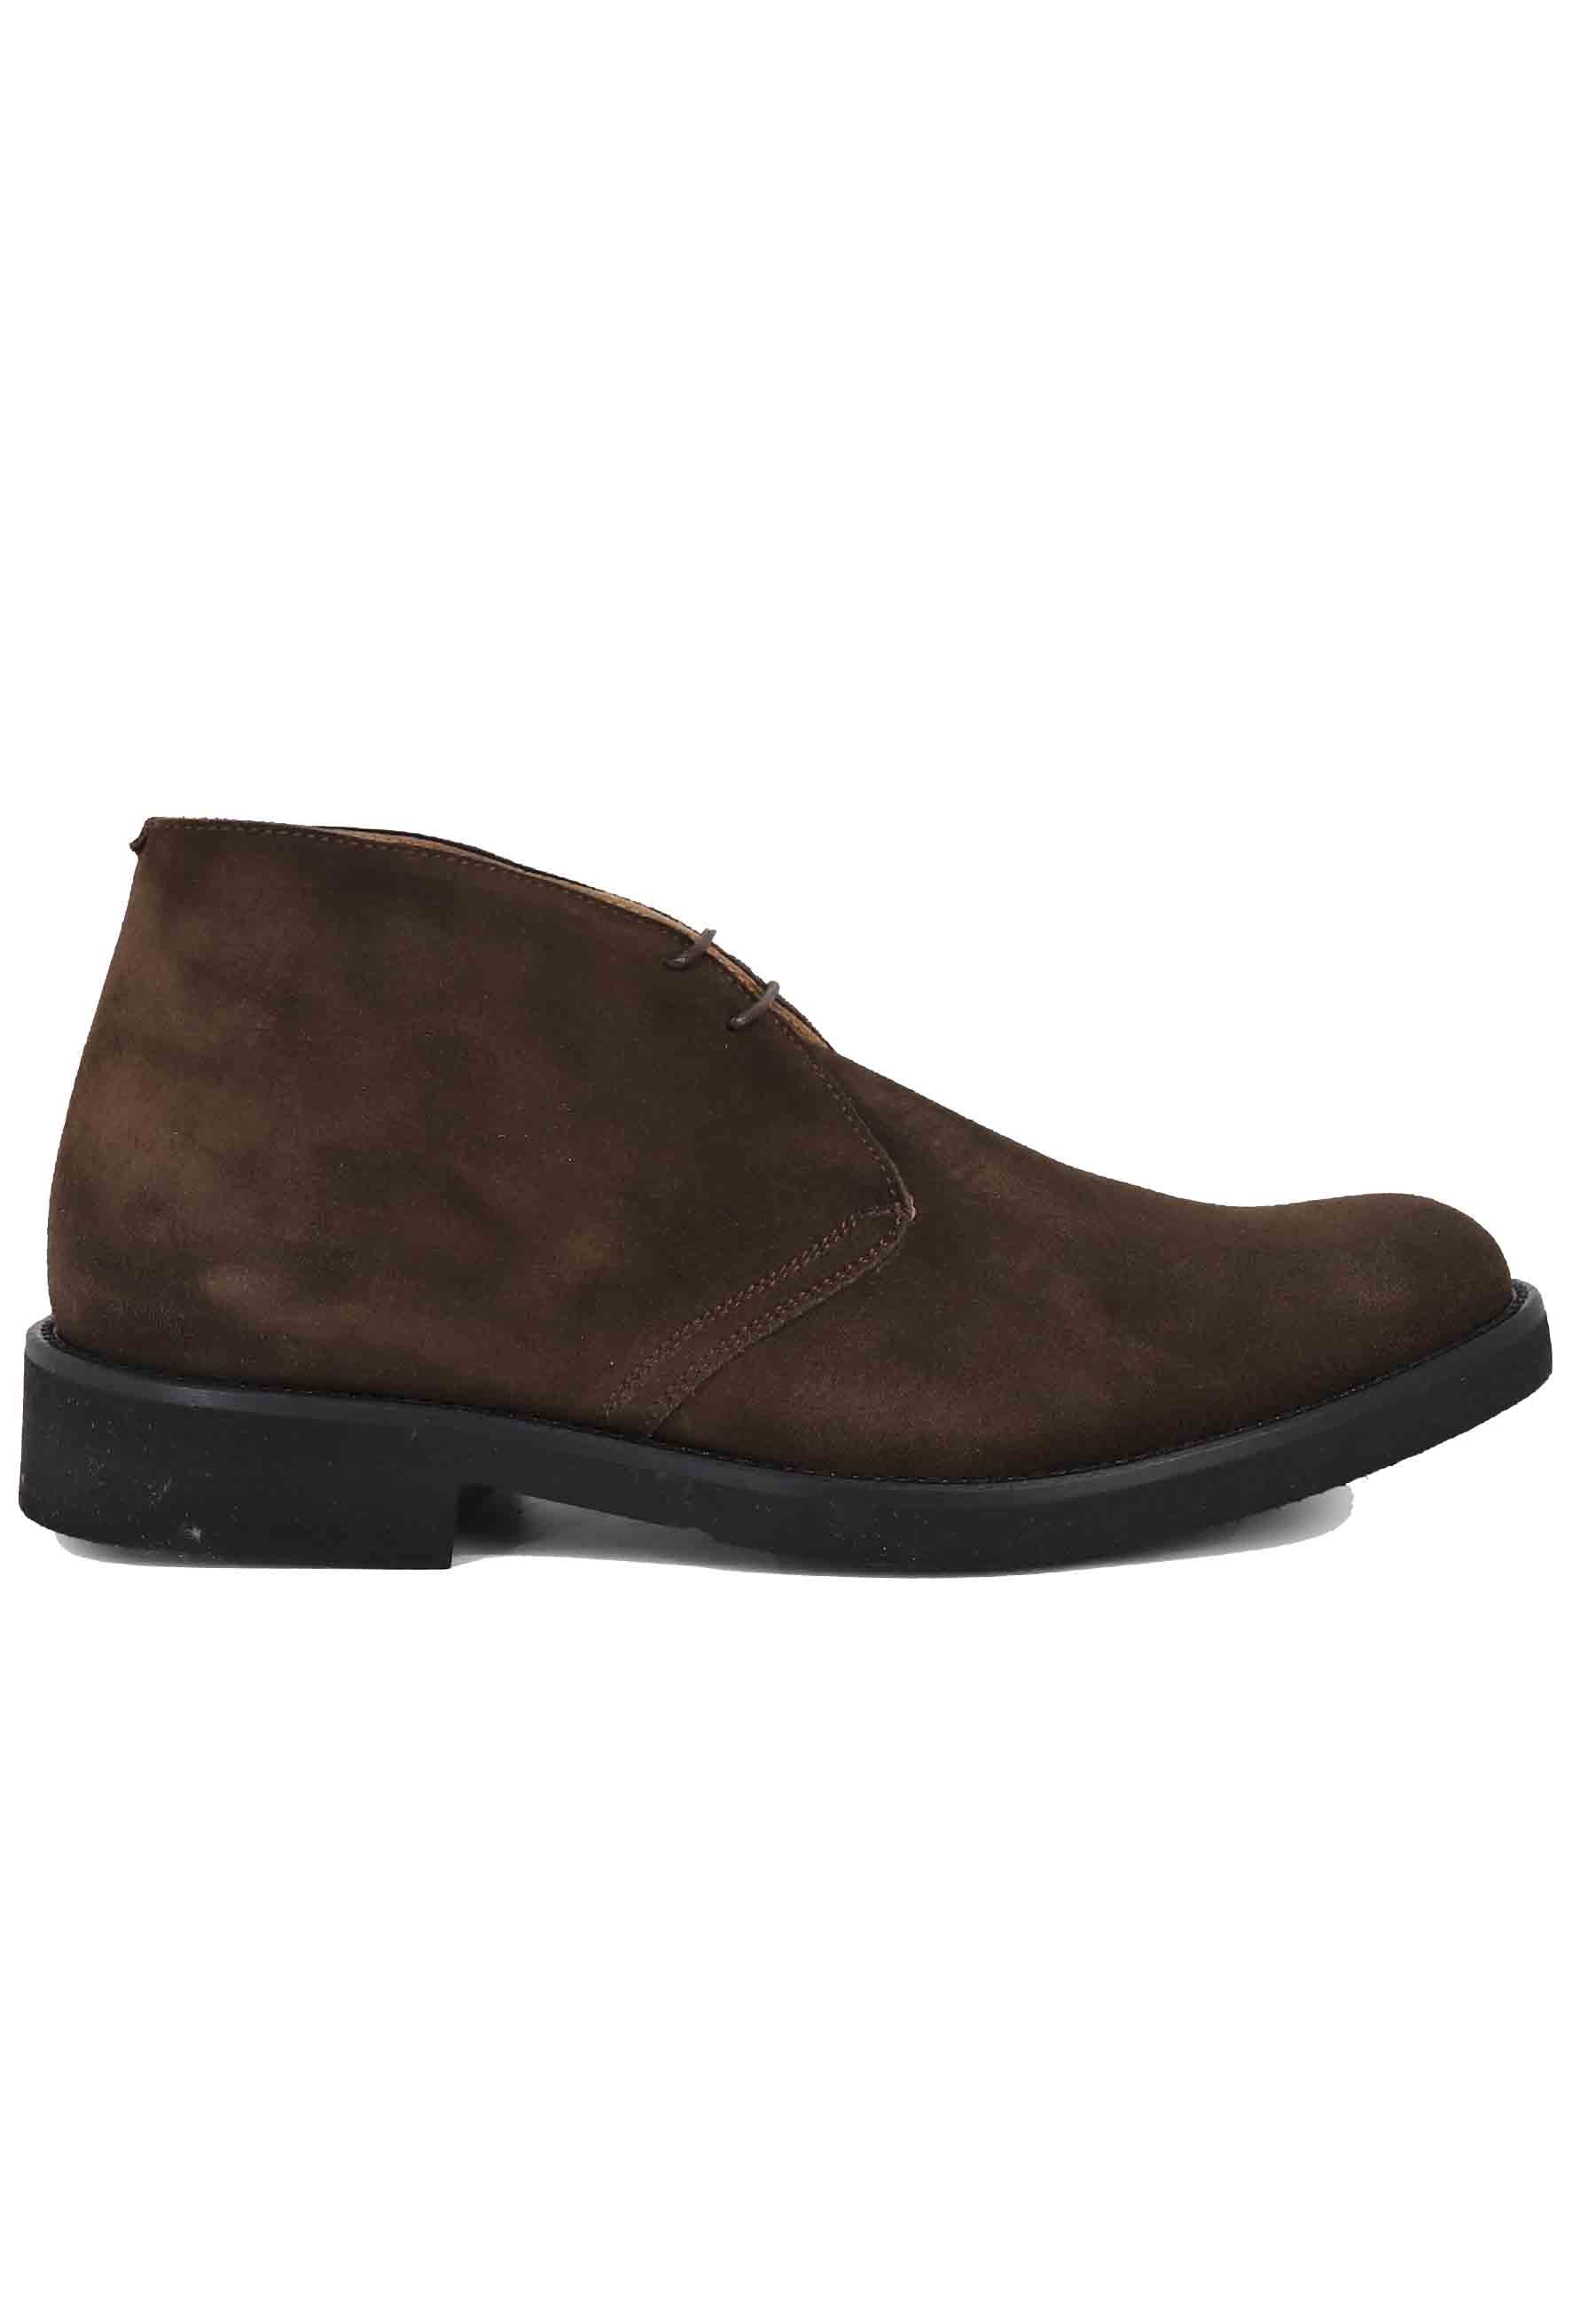 Men's ankle boots in dark brown suede with ultra-light rubber sole